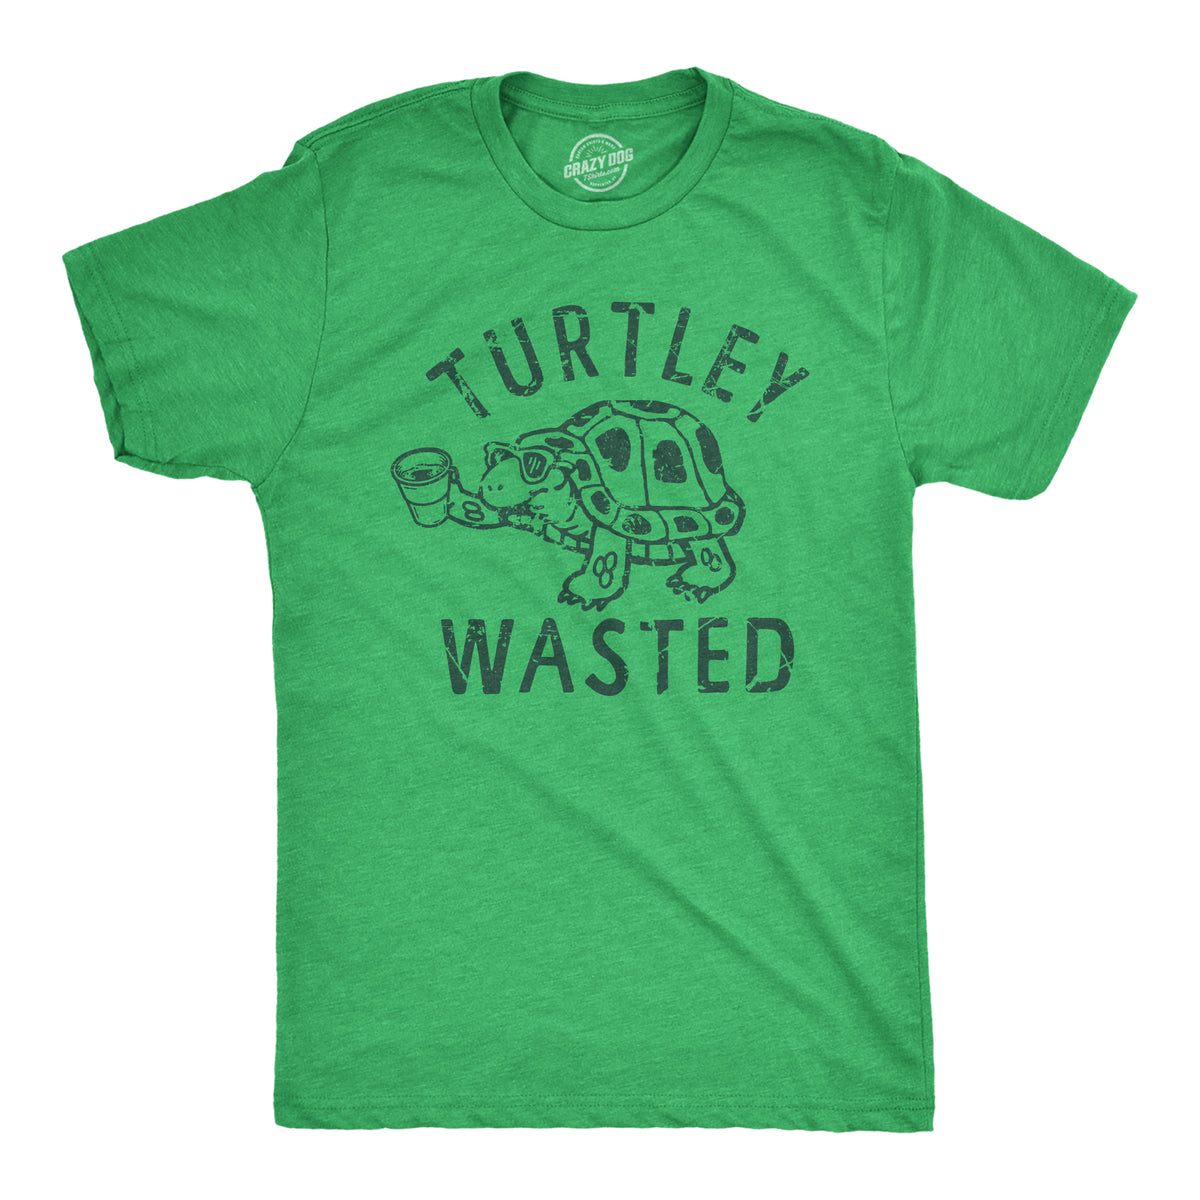 Funny Heather Green - TURTLEY Turtley Wasted Mens T Shirt Nerdy Drinking Animal Tee